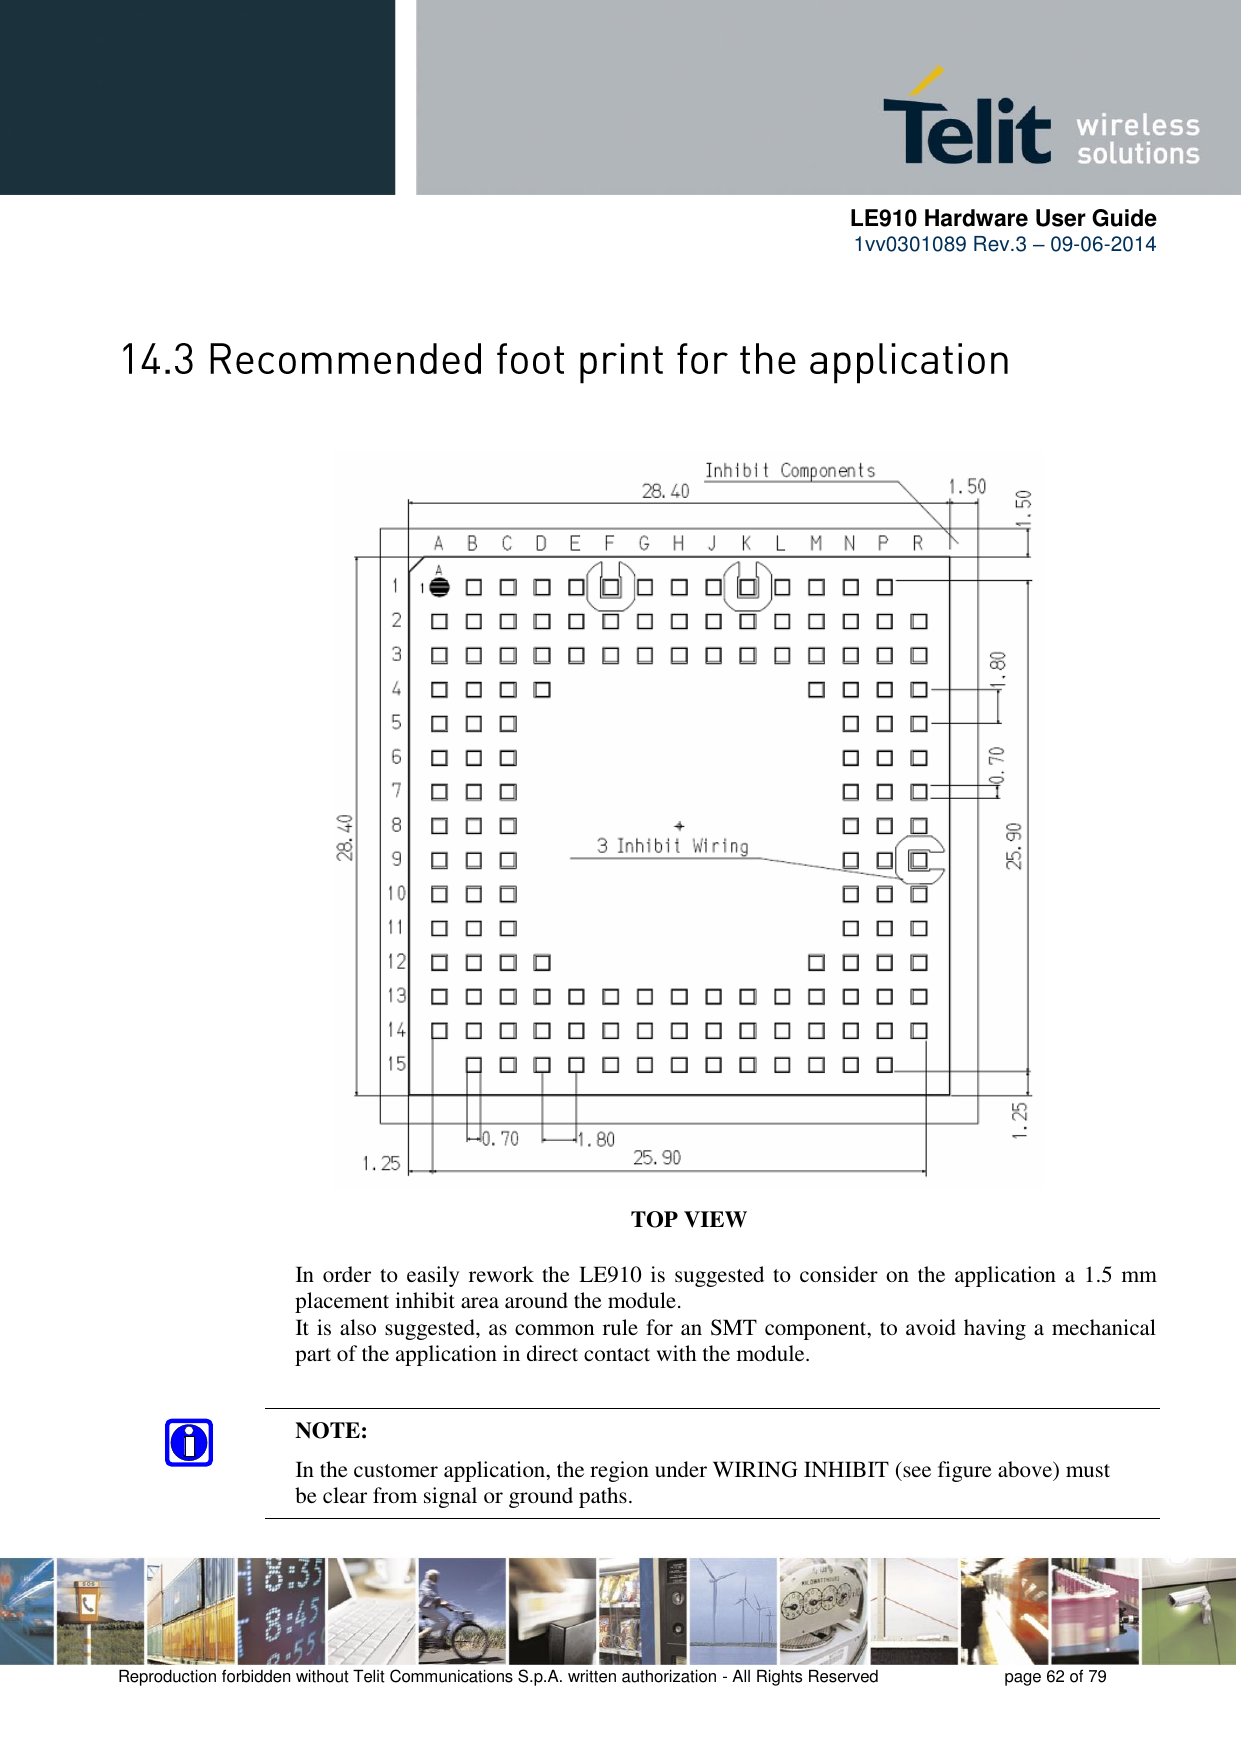      LE910 Hardware User Guide 1vv0301089 Rev.3 – 09-06-2014    Reproduction forbidden without Telit Communications S.p.A. written authorization - All Rights Reserved    page 62 of 79    TOP VIEW In order to easily rework the LE910 is suggested to consider on the application a 1.5 mm placement inhibit area around the module. It is also suggested, as common rule for an SMT component, to avoid having a mechanical part of the application in direct contact with the module. NOTE:   In the customer application, the region under WIRING INHIBIT (see figure above) must   be clear from signal or ground paths.  